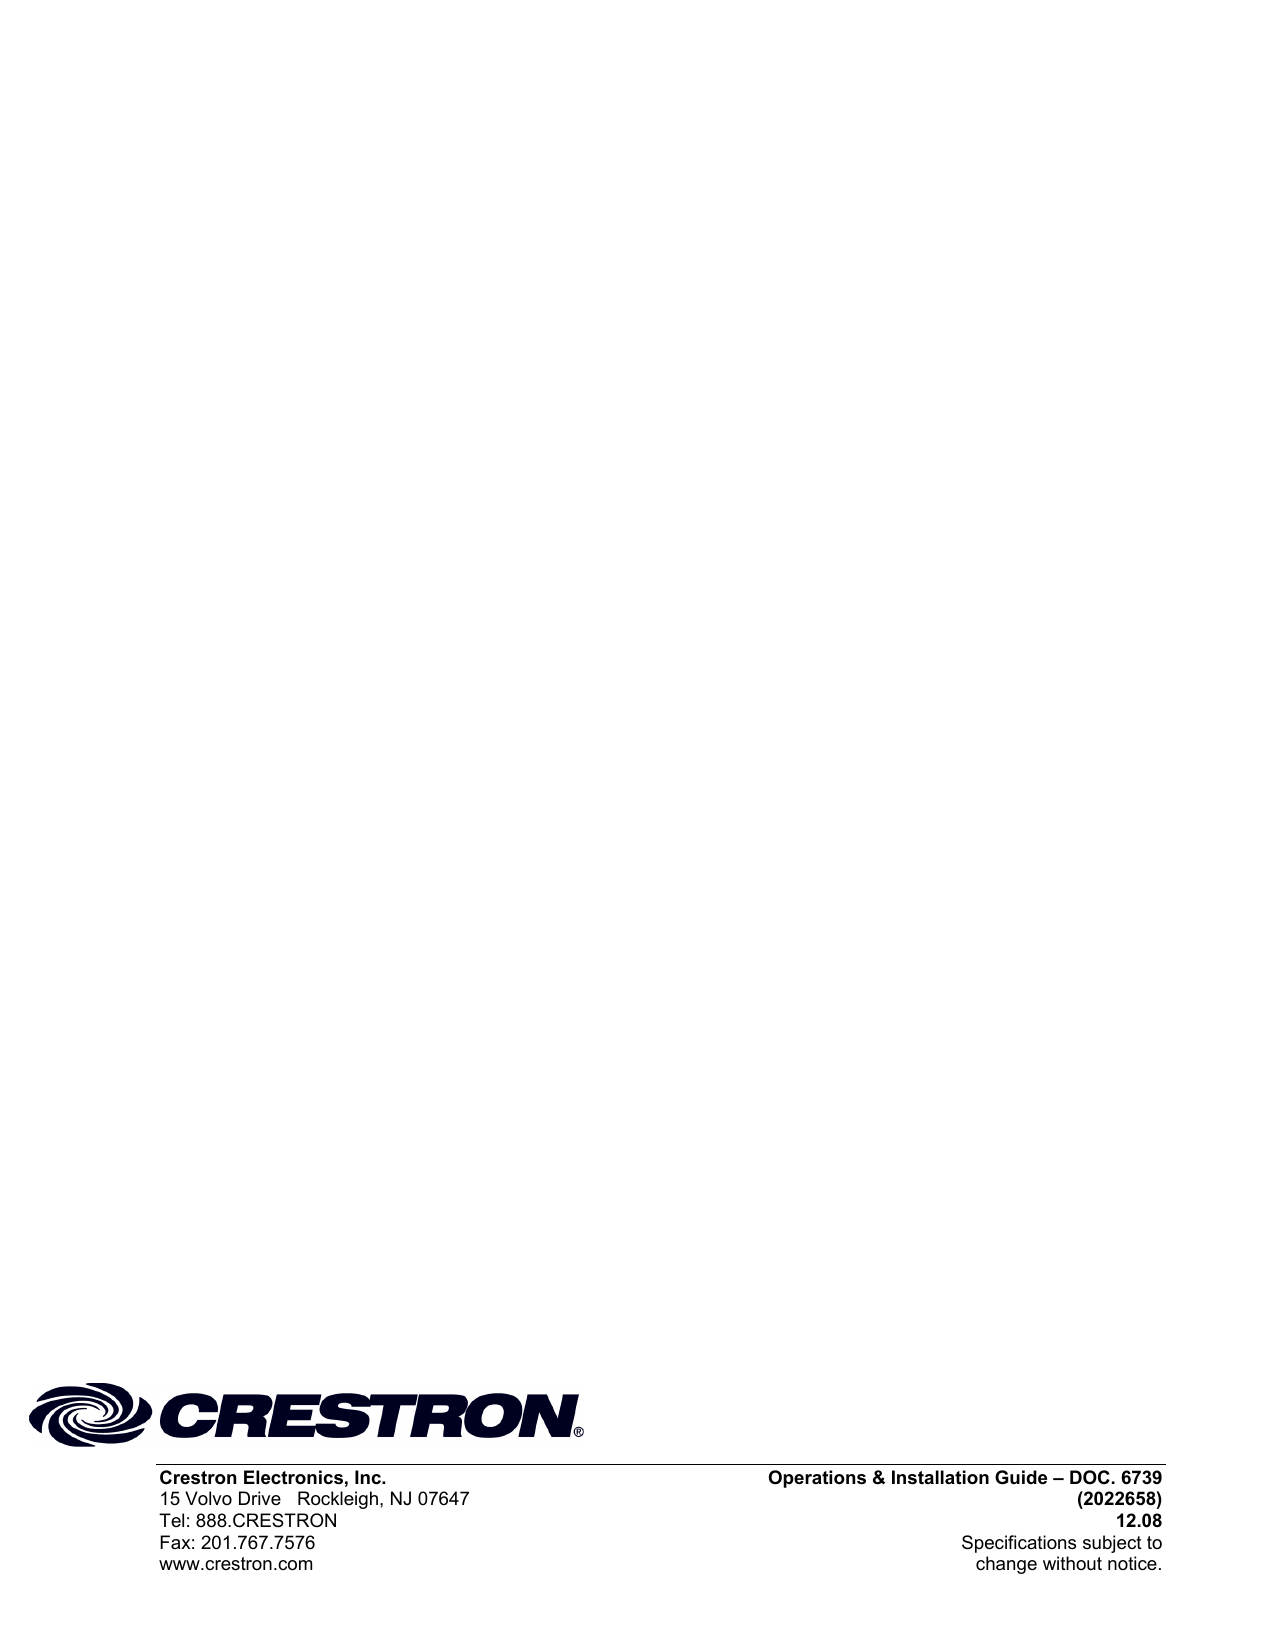  Crestron Electronics, Inc.  Operations &amp; Installation Guide – DOC. 6739 15 Volvo Drive   Rockleigh, NJ 07647 (2022658) Tel: 888.CRESTRON 12.08 Fax: 201.767.7576  Specifications subject to  www.crestron.com  change without notice.                                                                